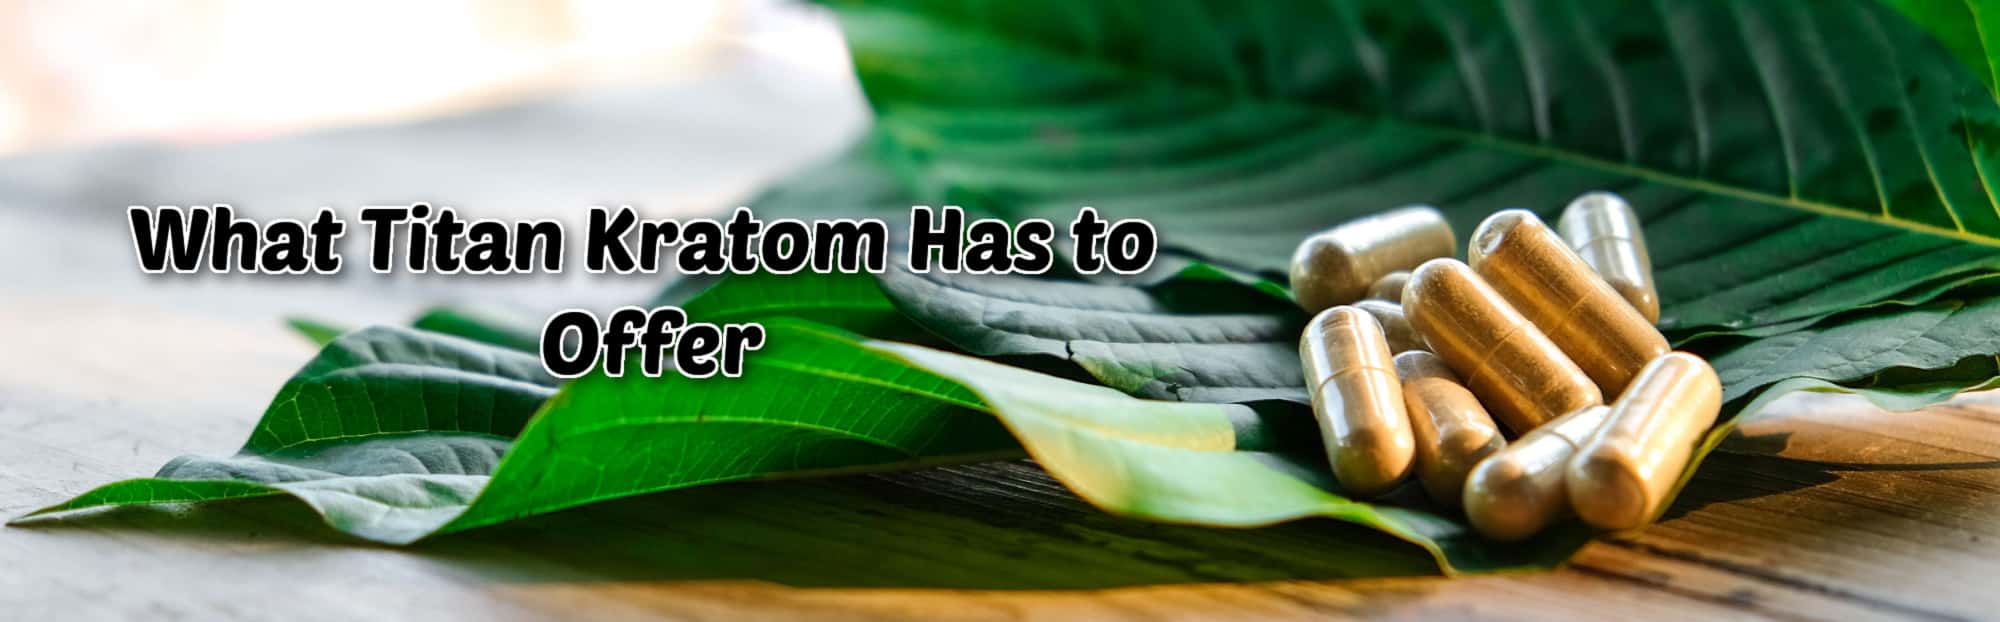 image of what titan kratom has to offer